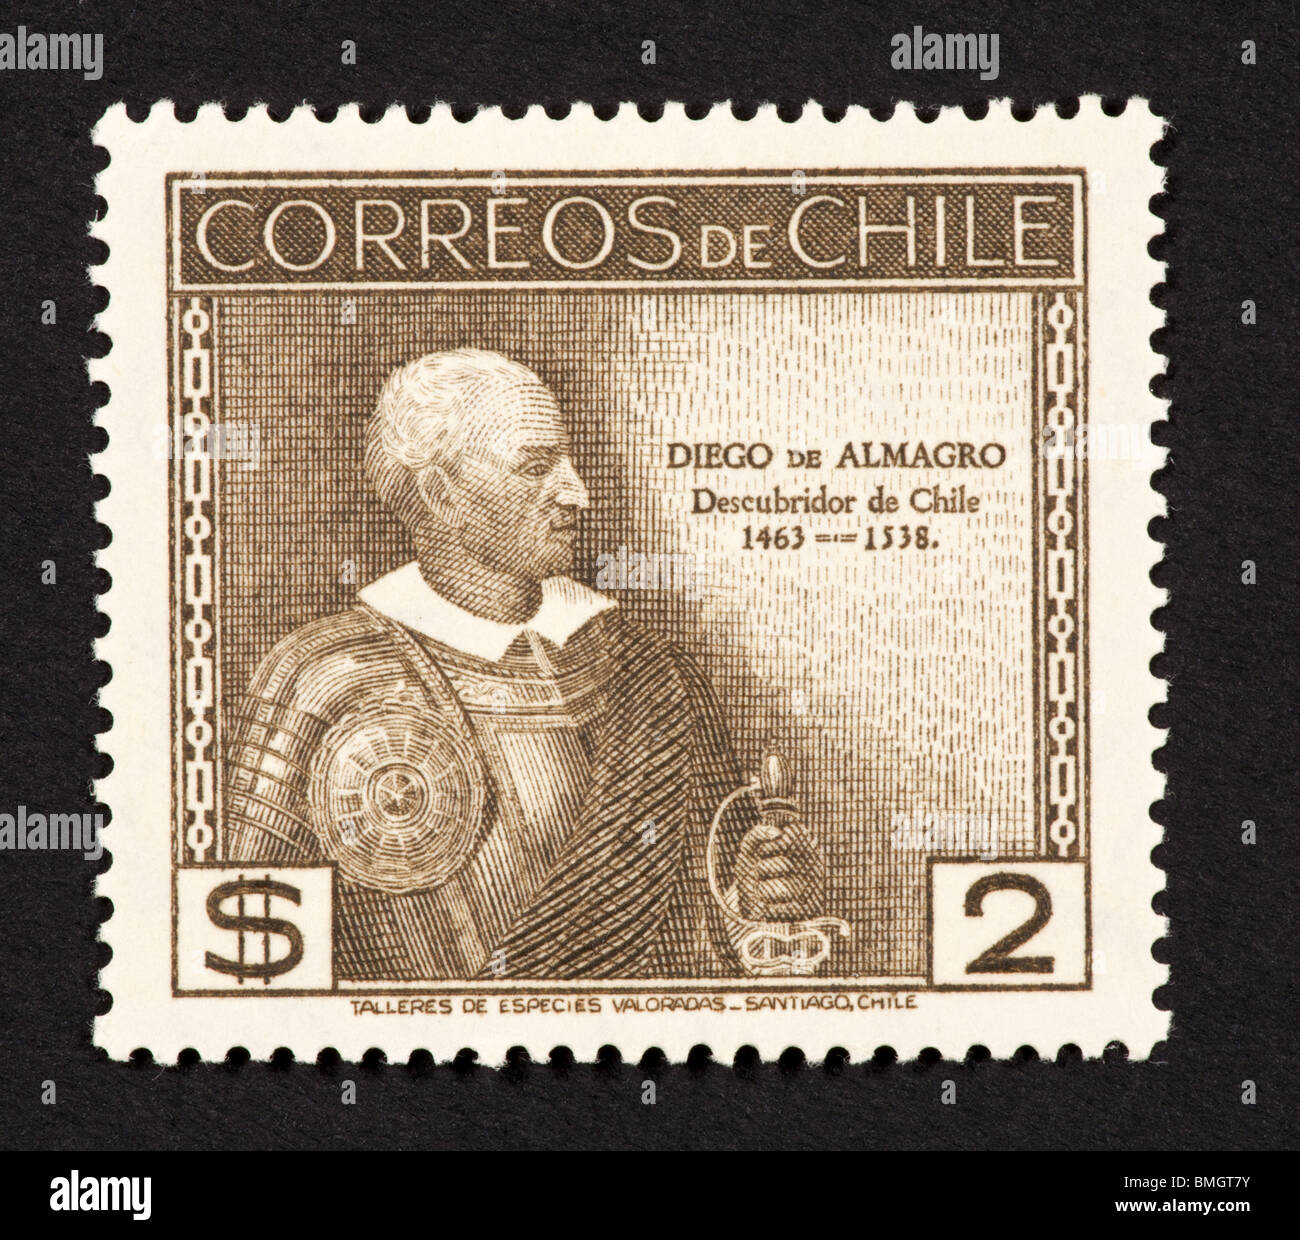 Postage stamp from Chile depicting Diego de Almagro, conquistador and discoverer of Chile. Stock Photo